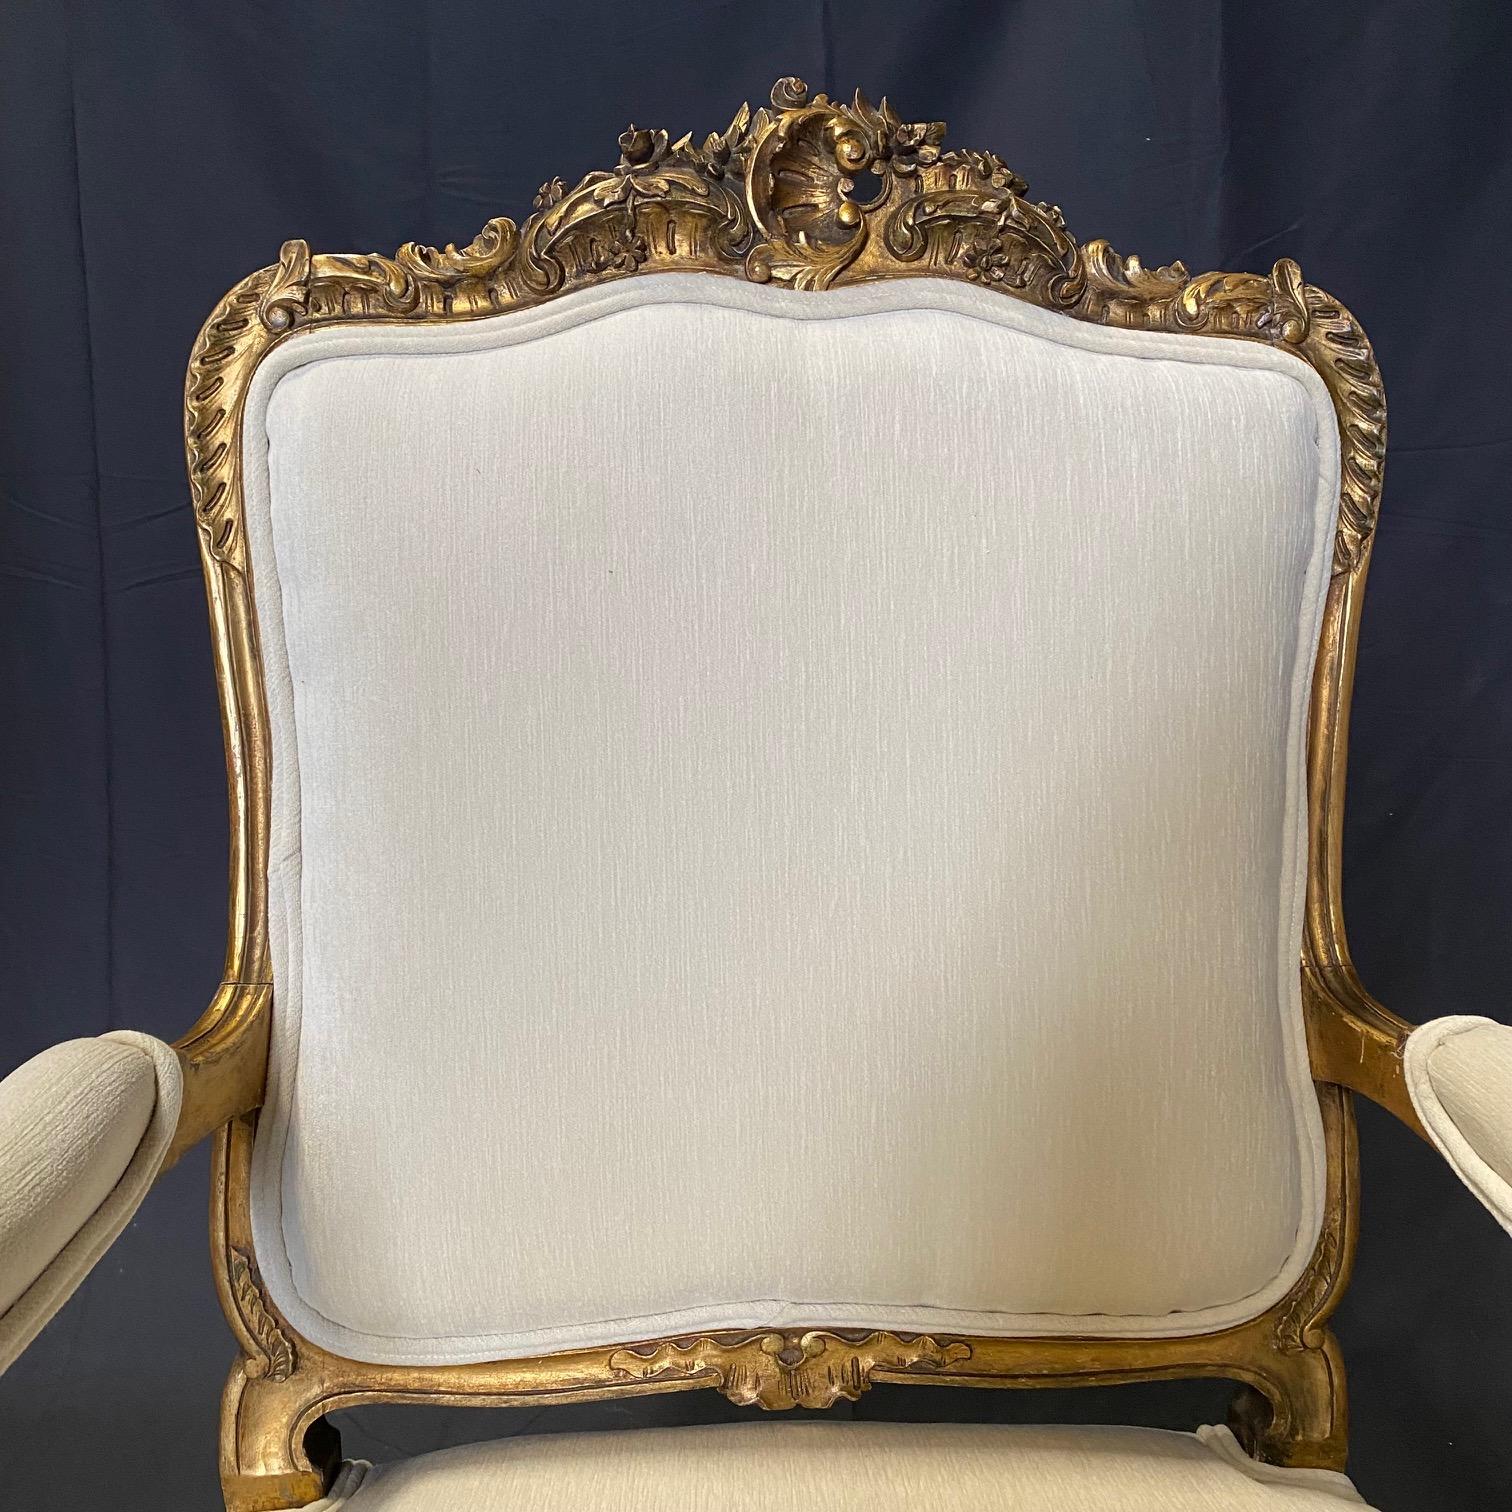  Pair of Antique French Louis XV Fauteuil Gilded Arm Chairs  For Sale 6